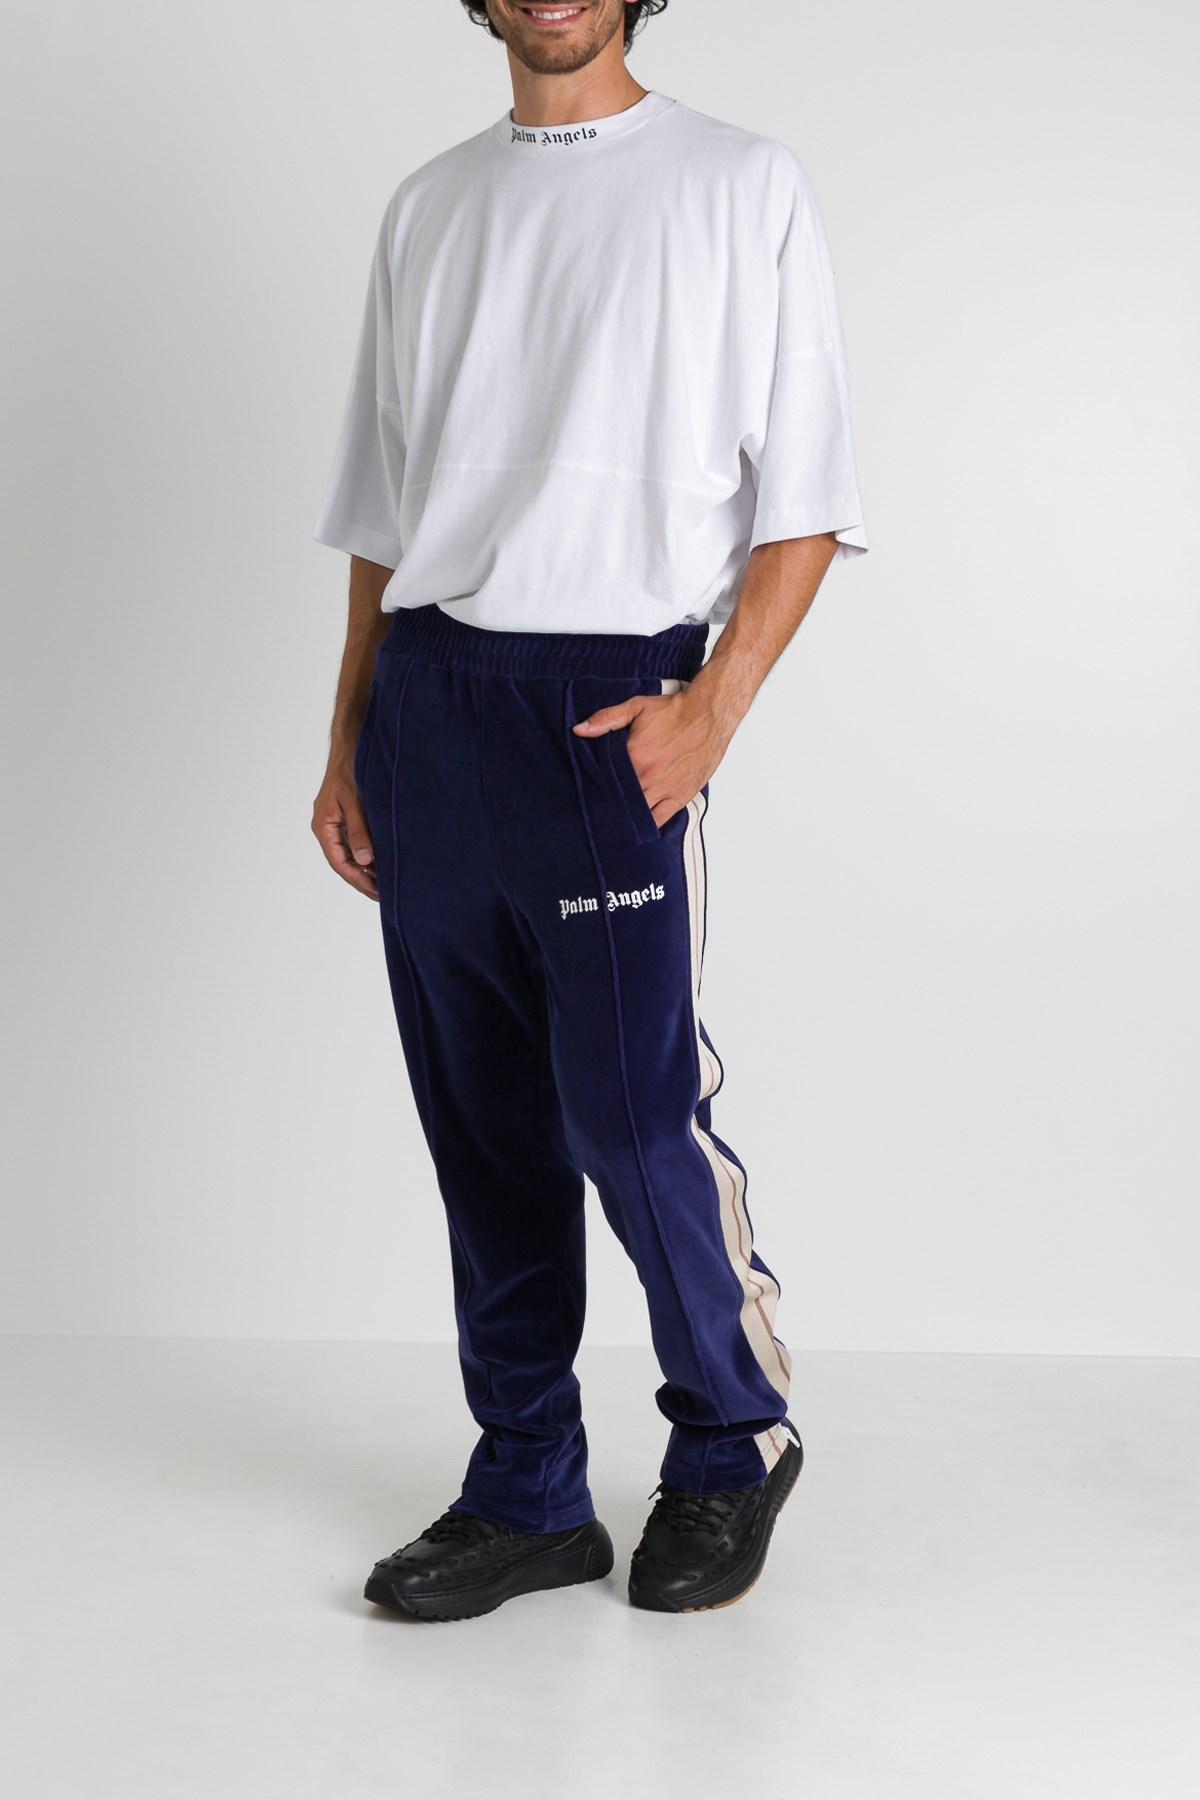 Palm Angels Cotton Chenille Track Pants in Blue for Men - Lyst